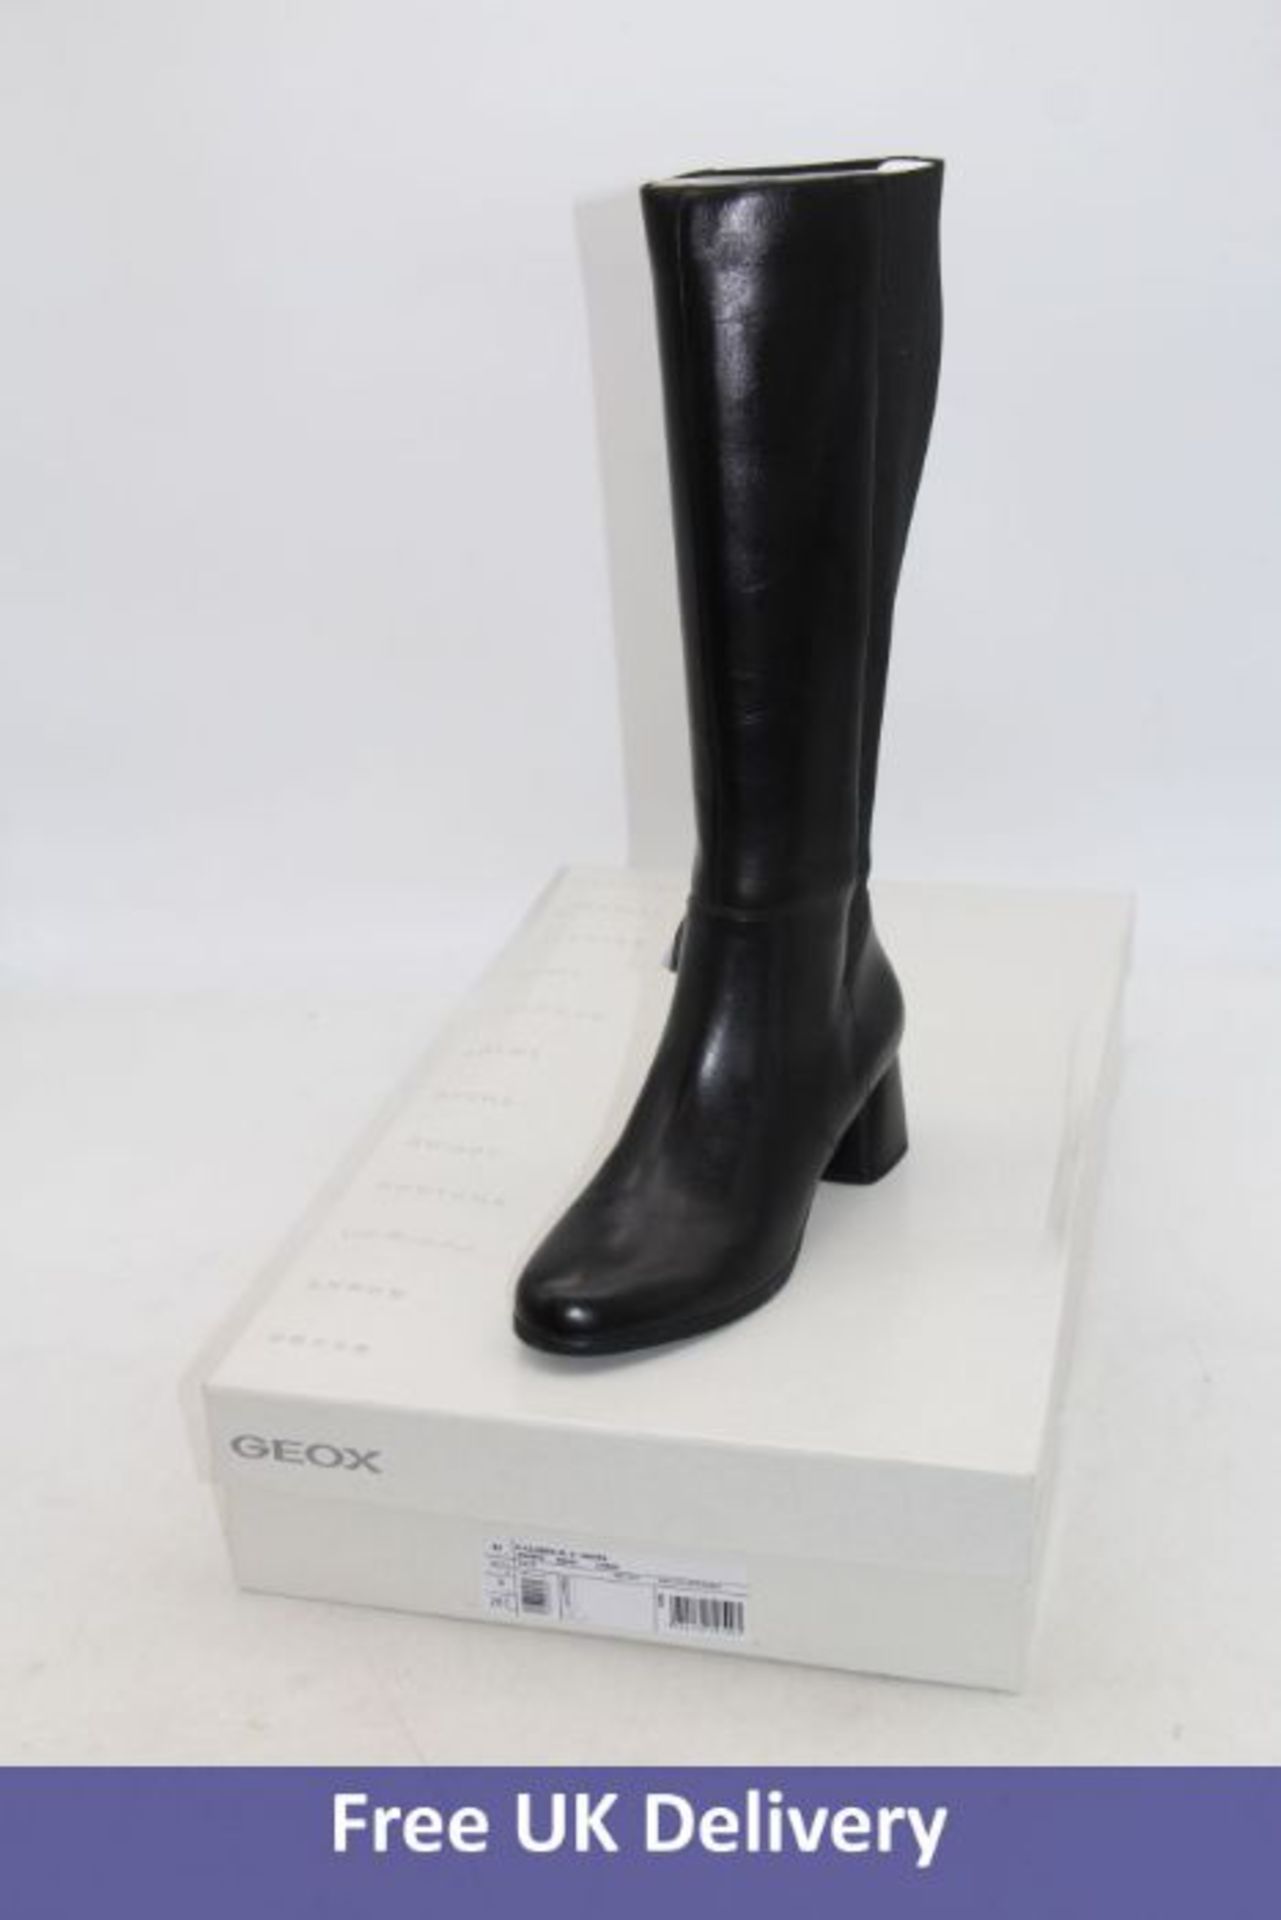 Two Geox Women's D Calinda Mid D Knee High Boots, Black, UK 8. Box damaged - Image 2 of 2